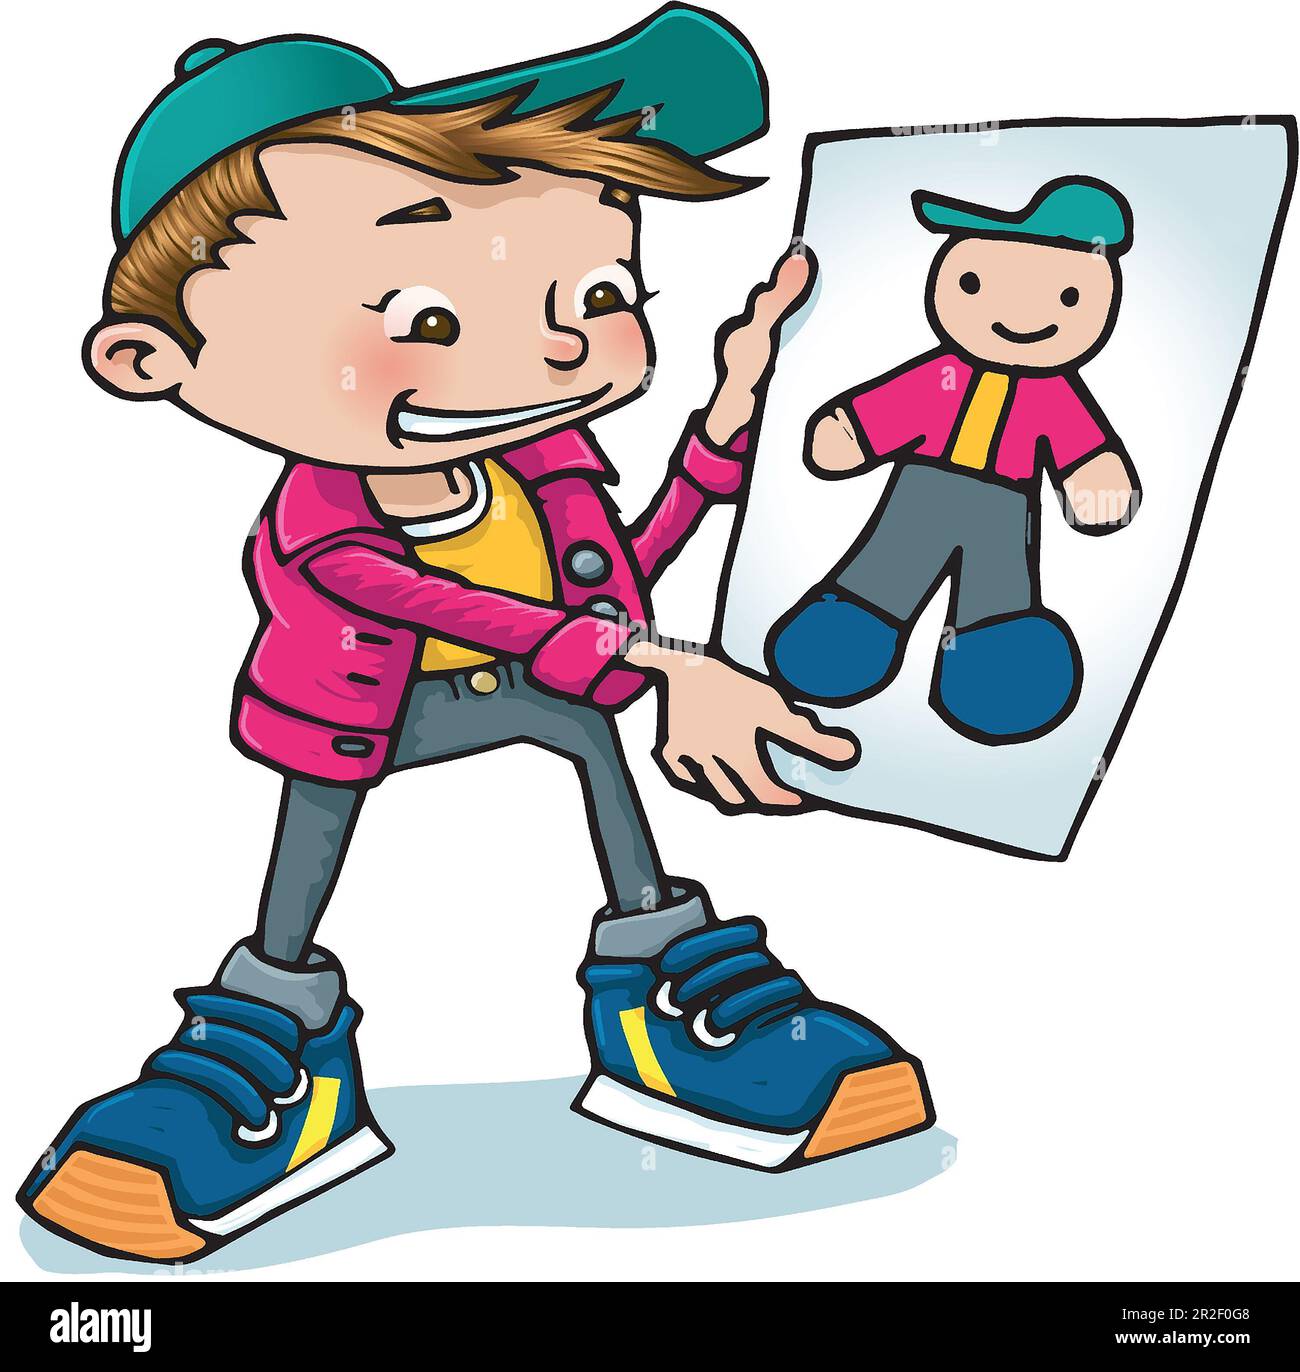 Young boy, aged 5-7 years, holding up a drawing of himself, educational art, arts and crafts activities for children, pencil control, teaching aids. Stock Photo